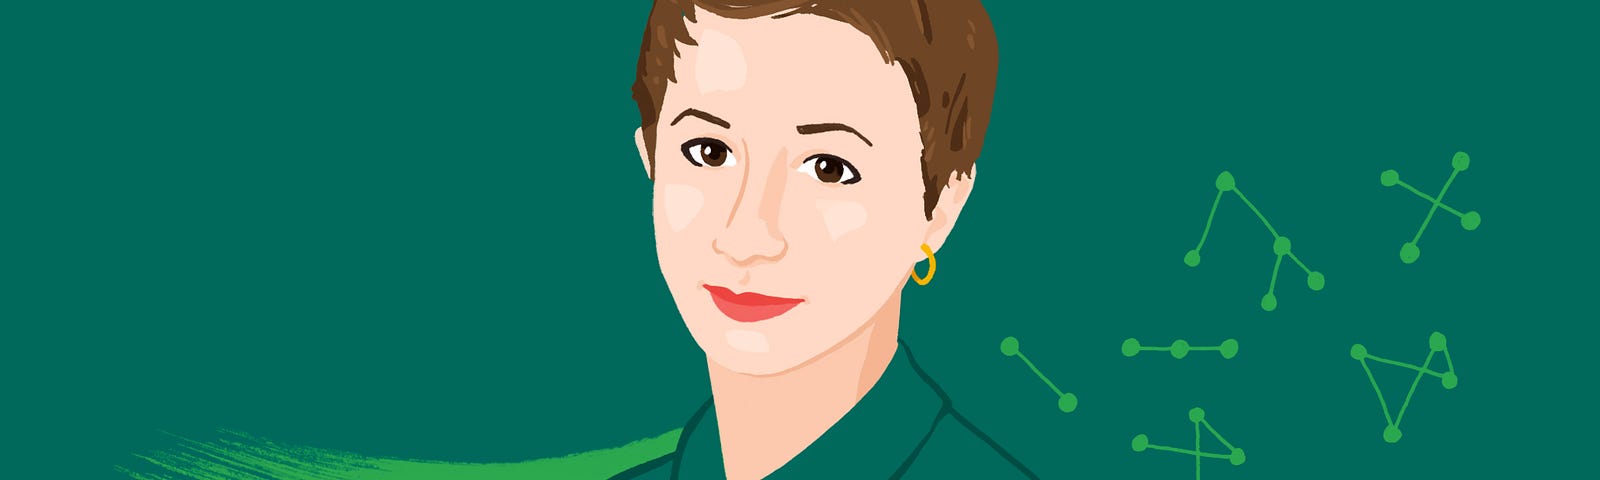 Illustrated portrait of Sarah Gold in a brushy style and shades of green